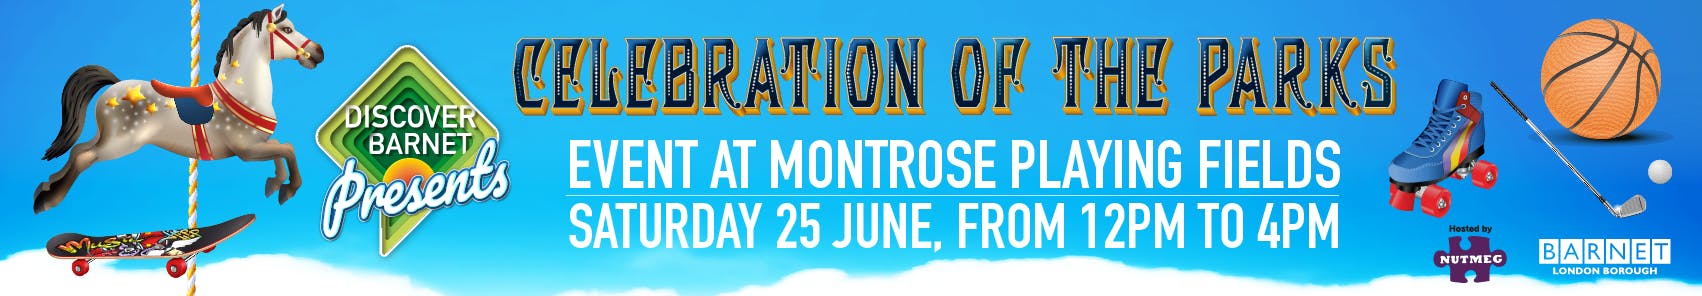 Celebration of the parks event at Montrose Playing Fields Saturday 25 June from 12pm to 4pm